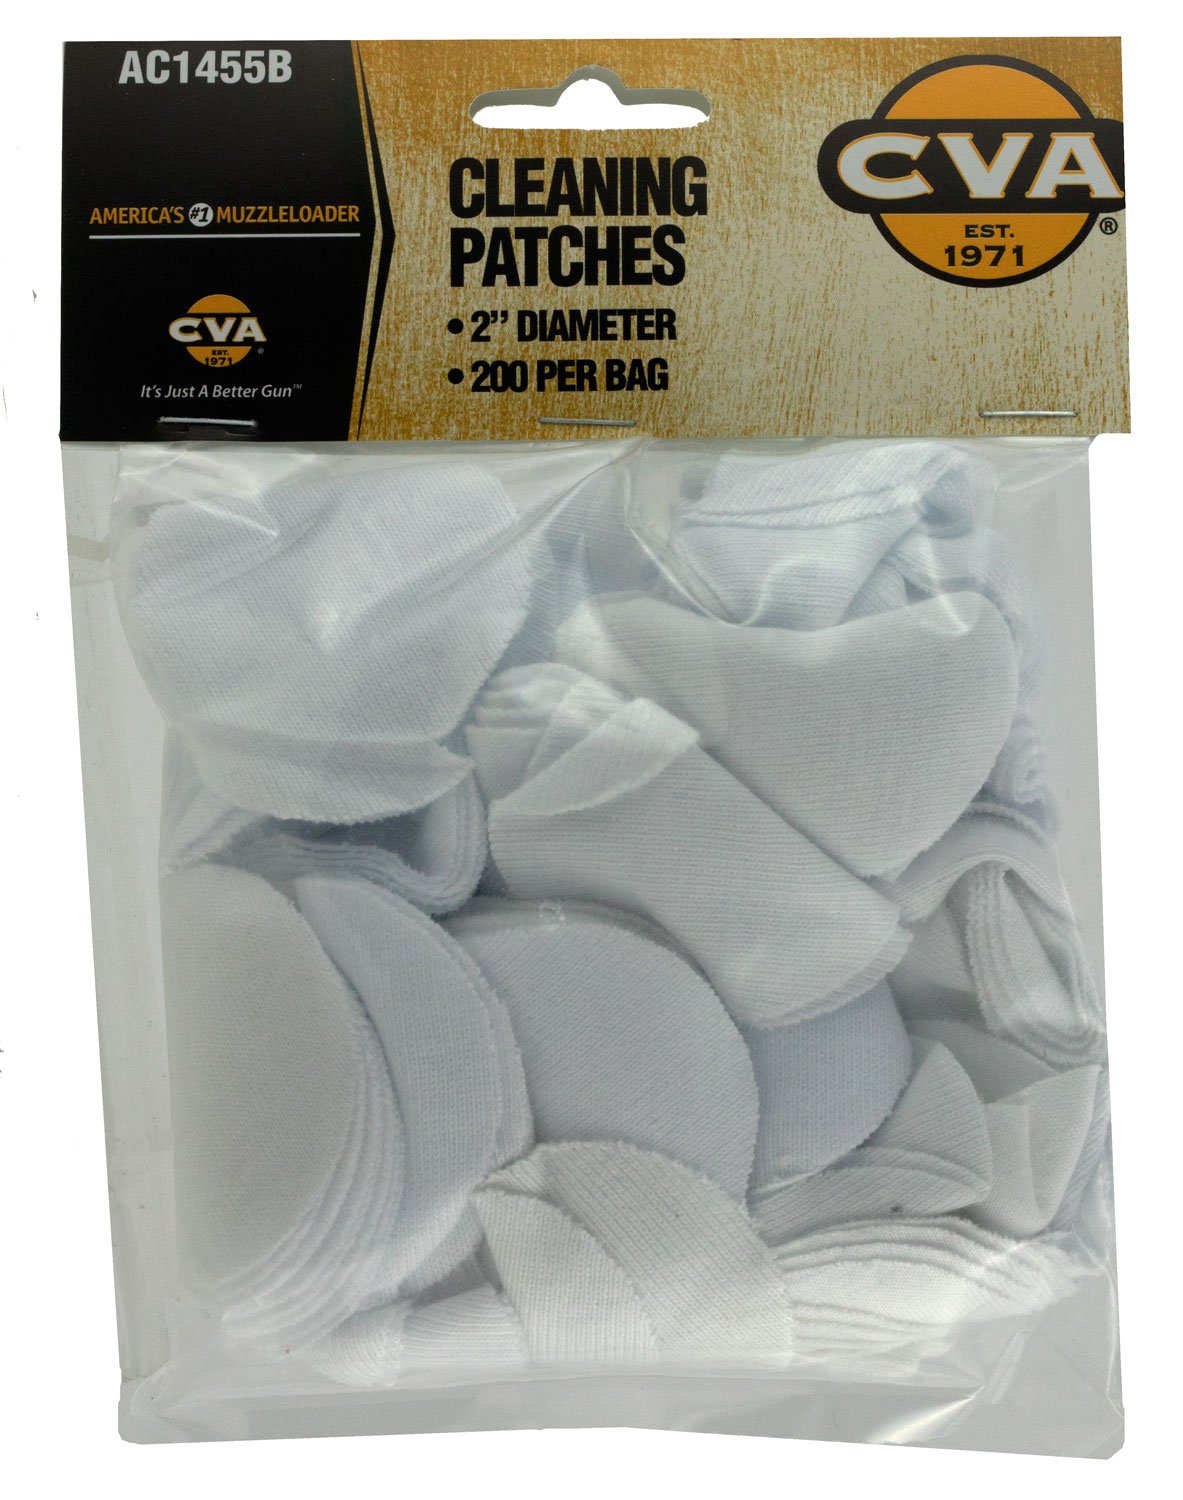 CVA CLEANING PATCHES 2